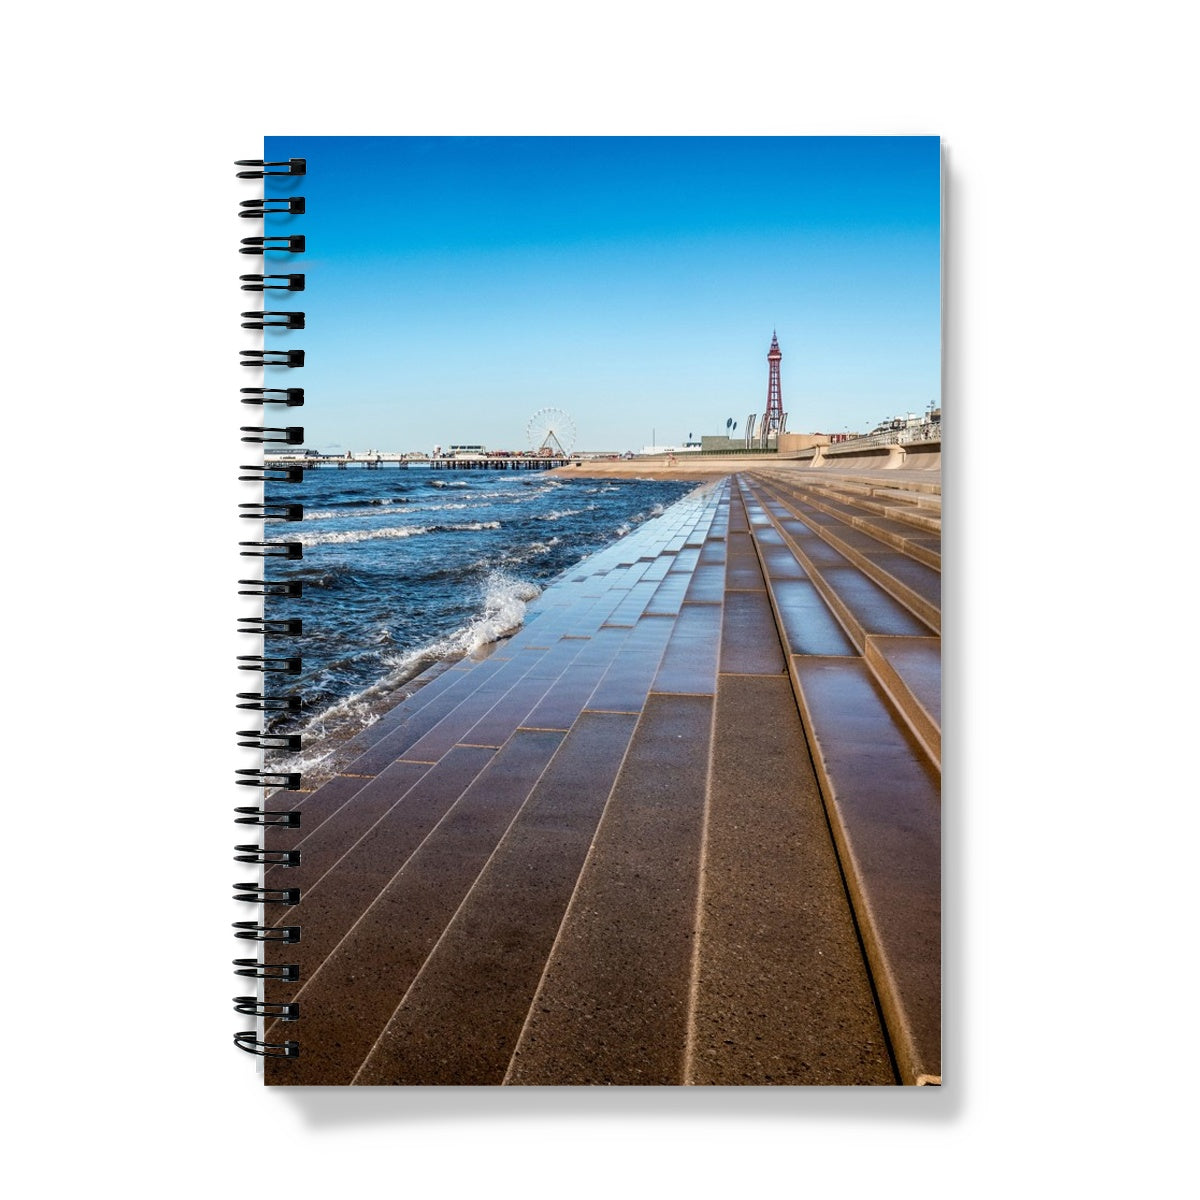 Blackpool's stone stepped sea defences with Blackpool Tower and Central Pier in the distance, Blackpool, UK. Notebook